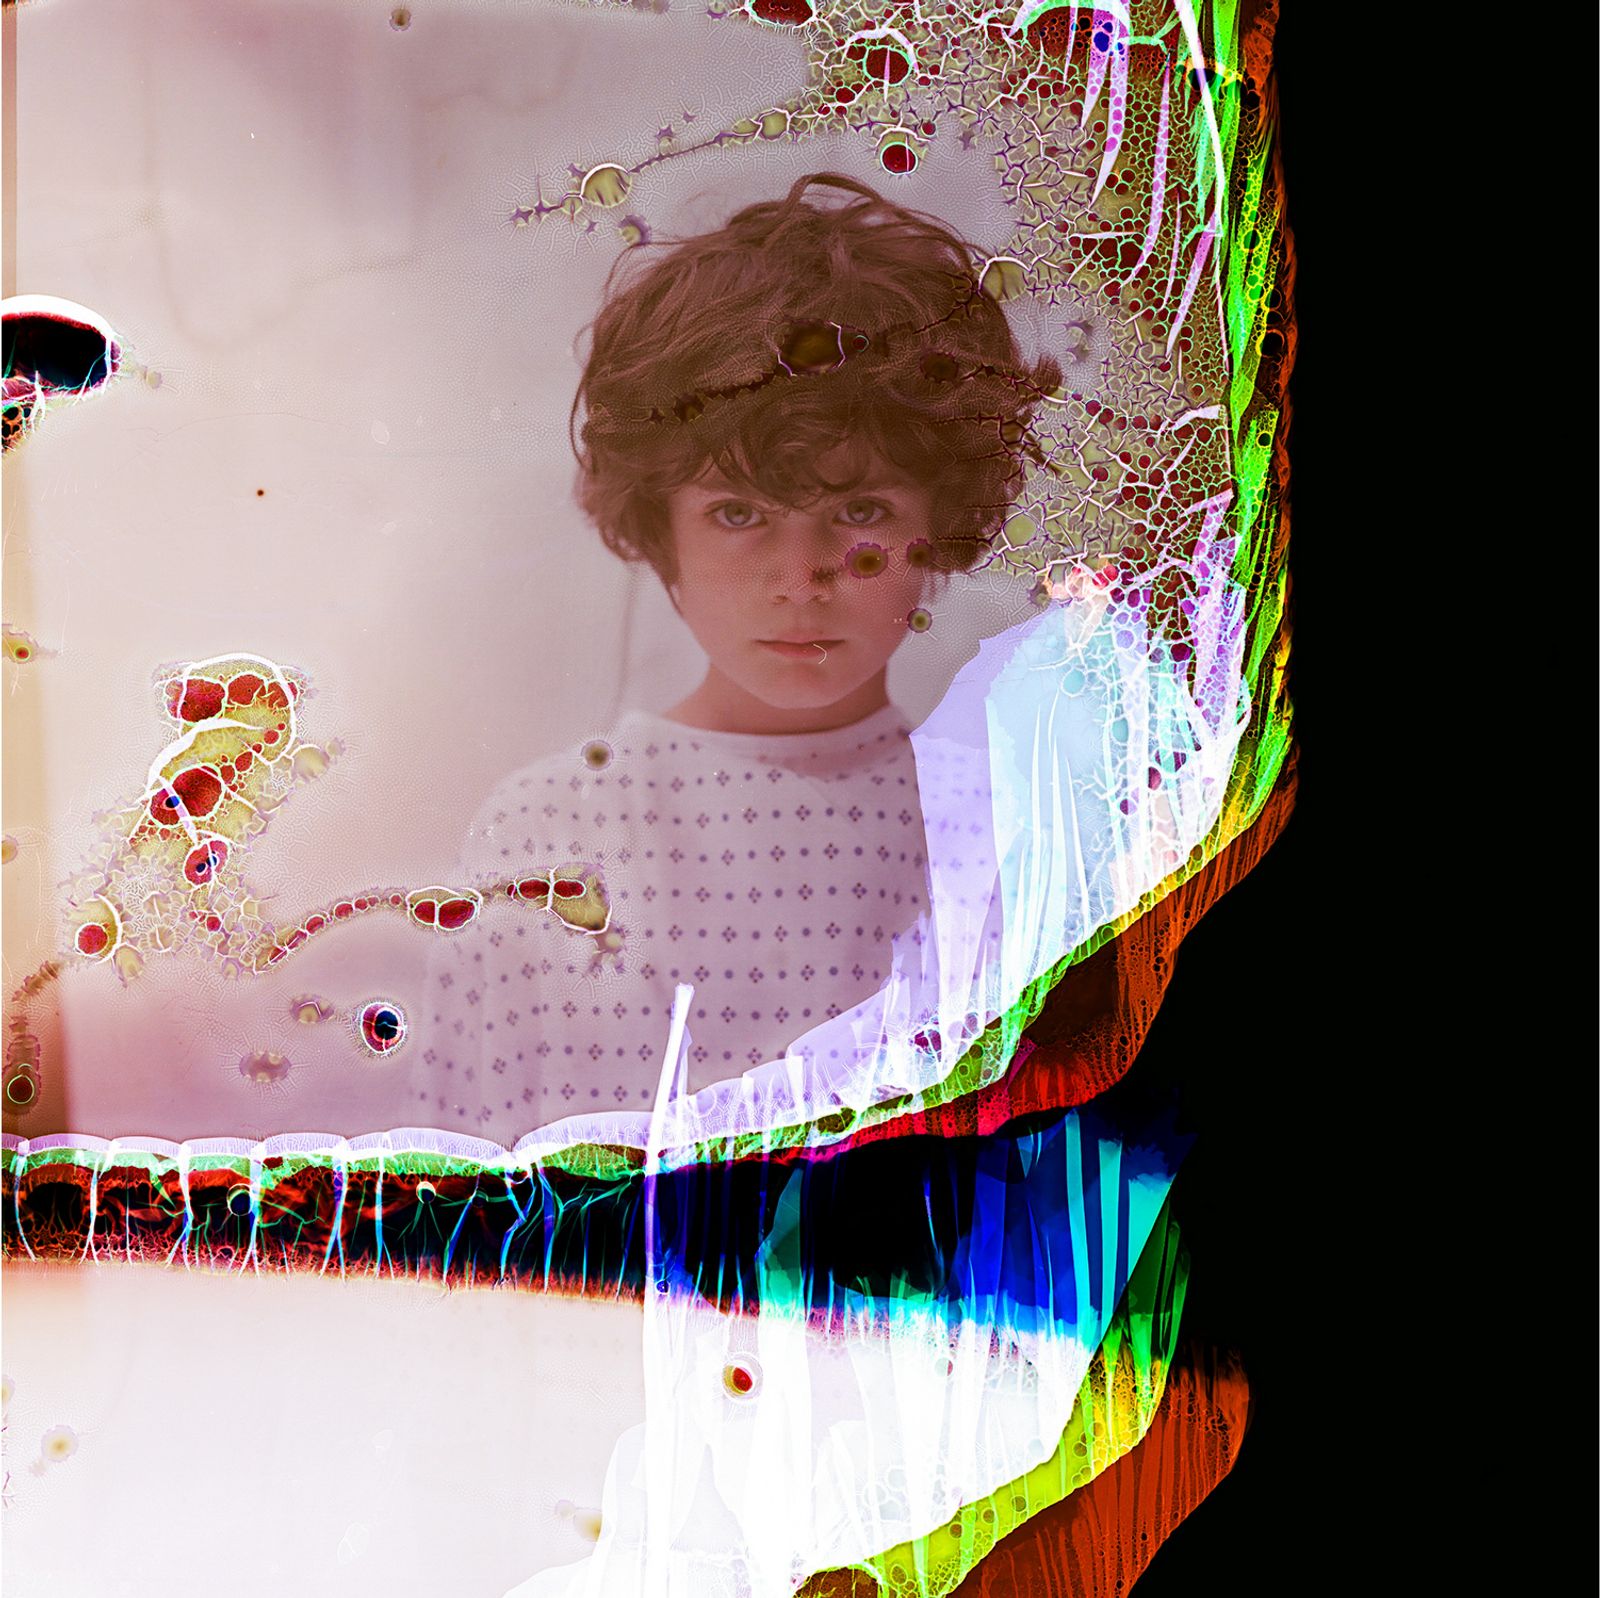 © Rhiannon Adam - Image from the Overhaul - Collaborative Project by Laura Pannack and Rhiannon Adam photography project